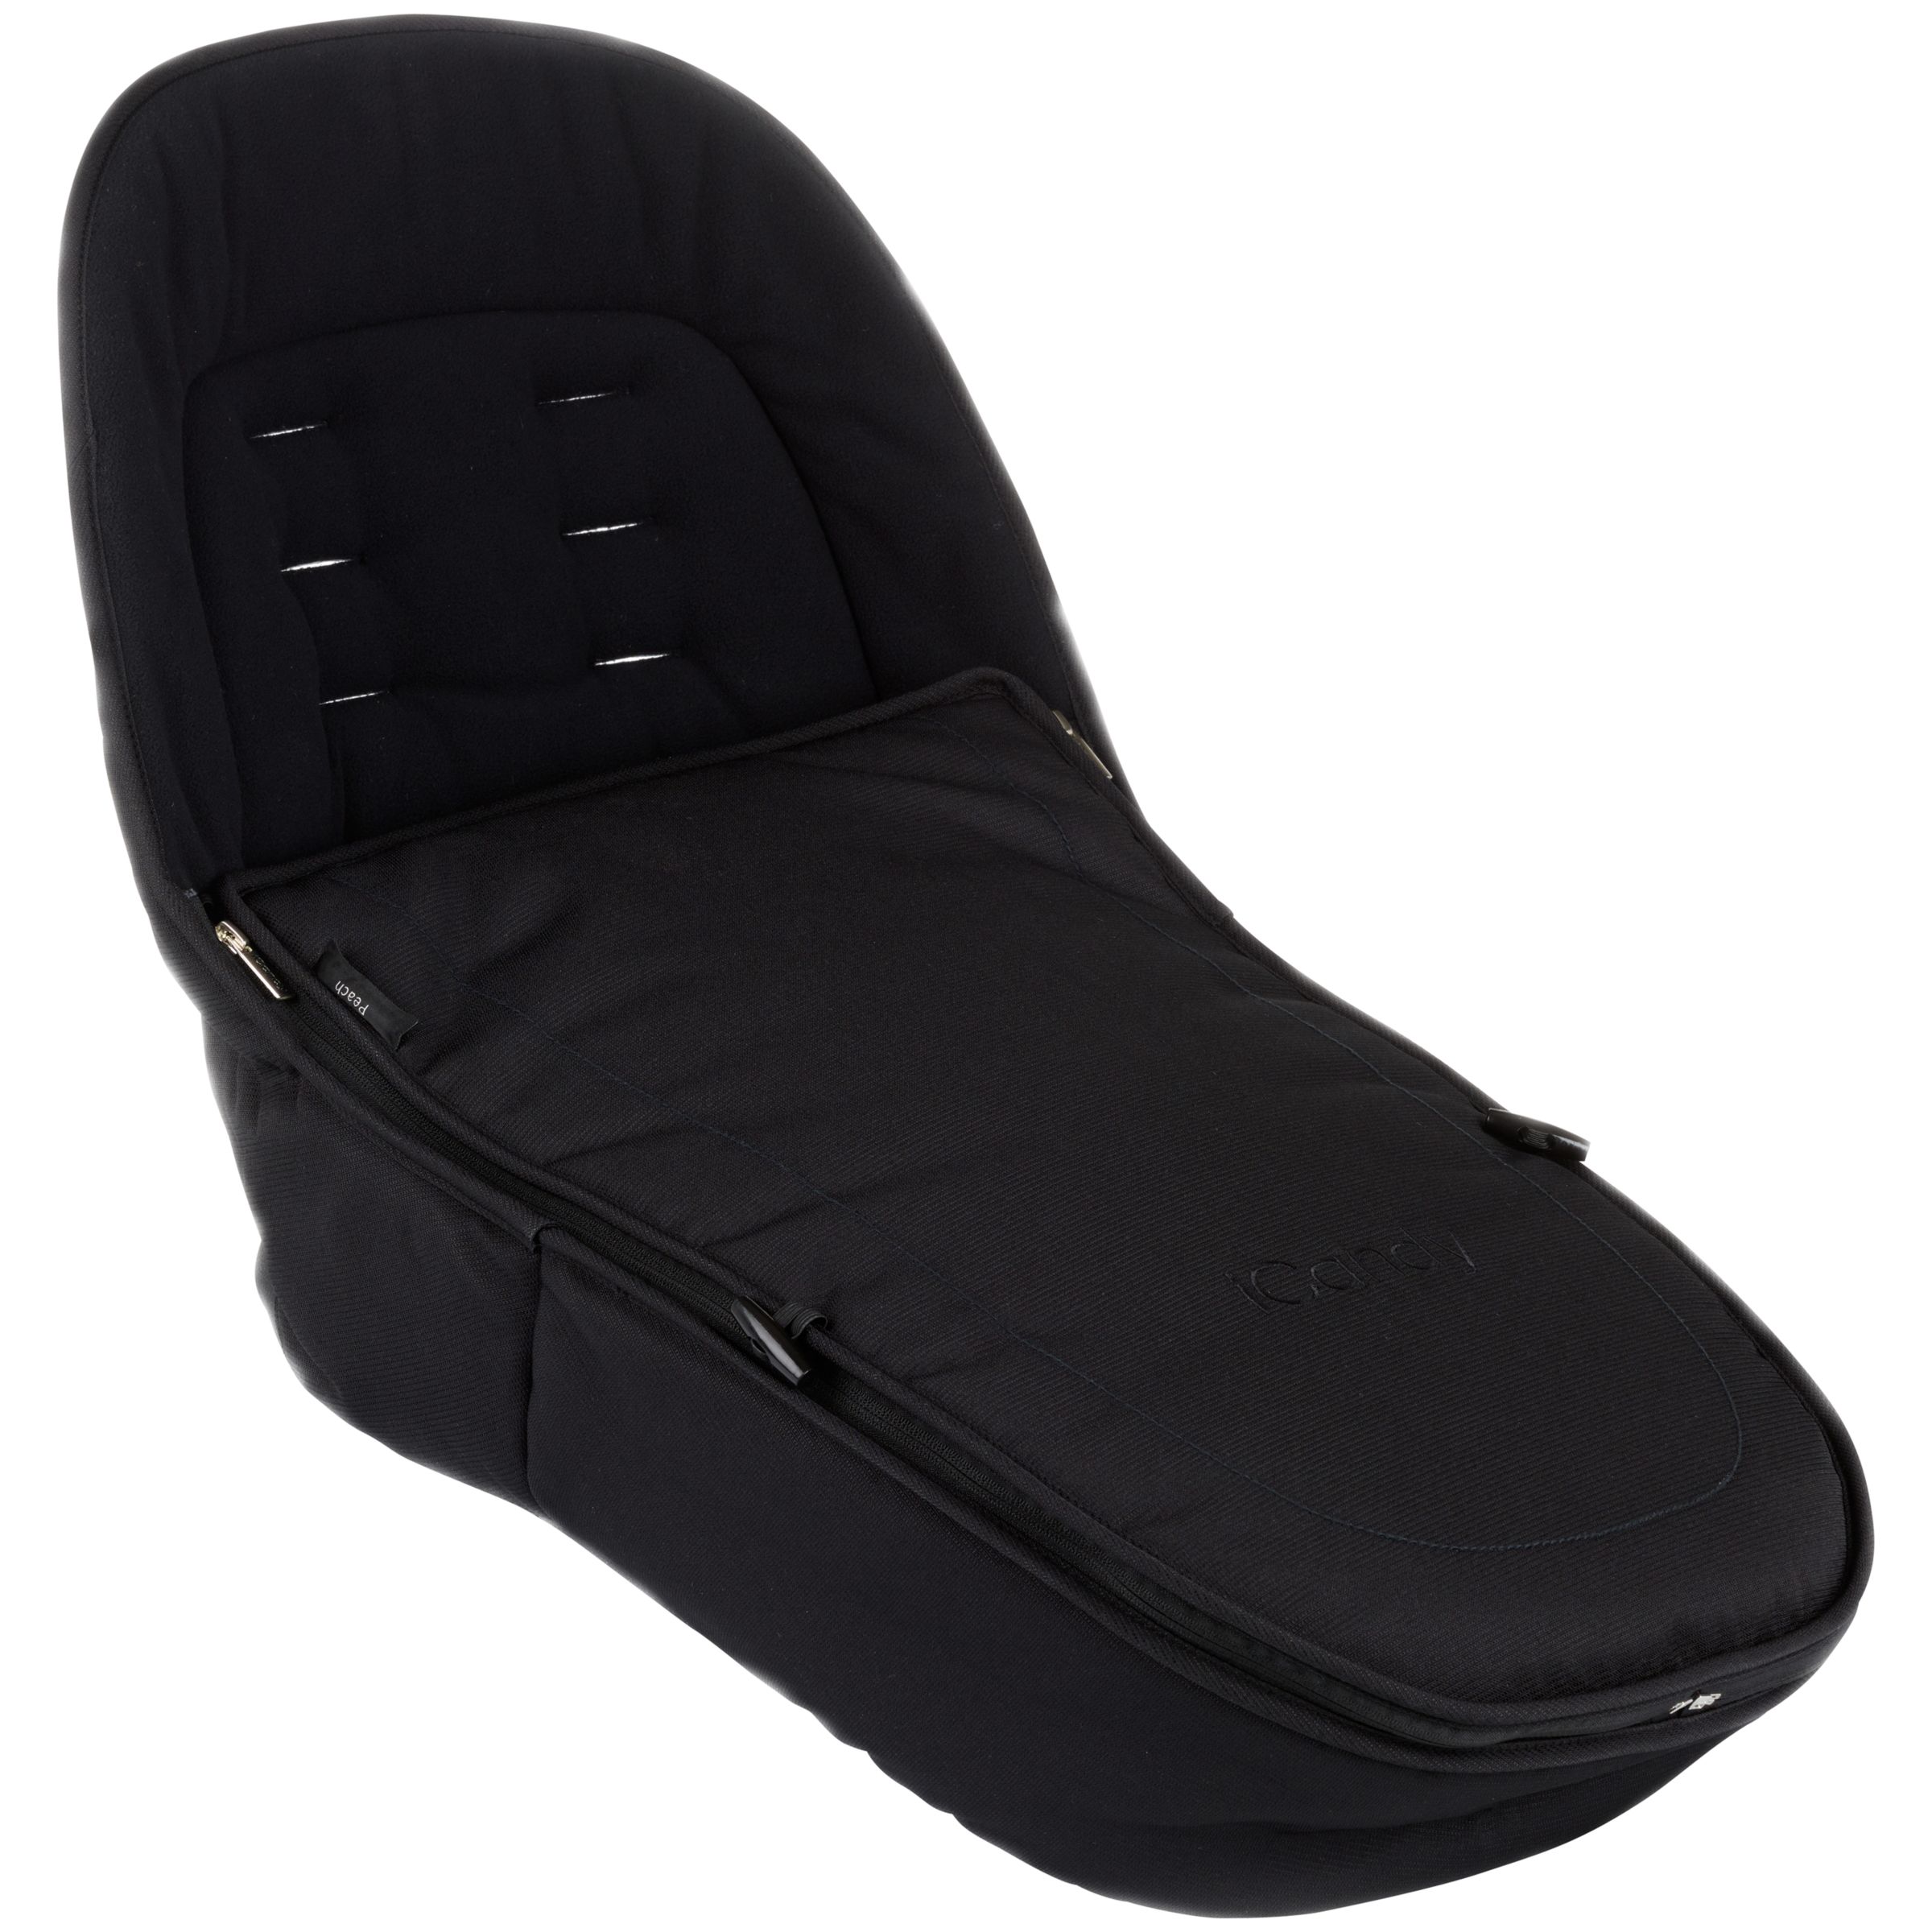 icandy peach compatible footmuff